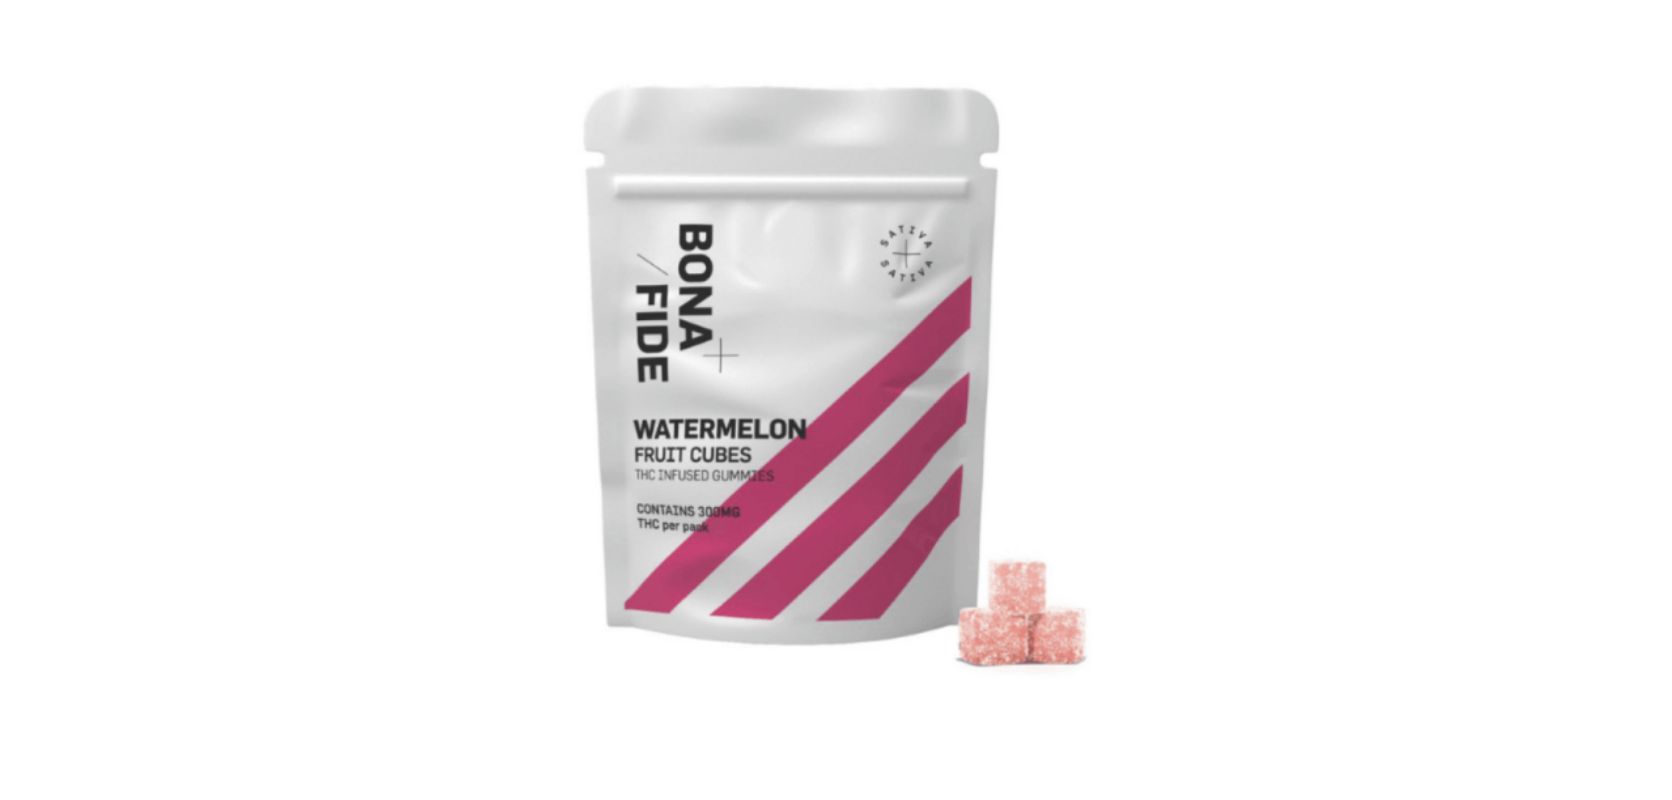 Buy these Bonafide Watermelon Fruit Cubes online at LowPriceBud and enjoy the best deals on weed, high-quality products and Canada-wide shipping!